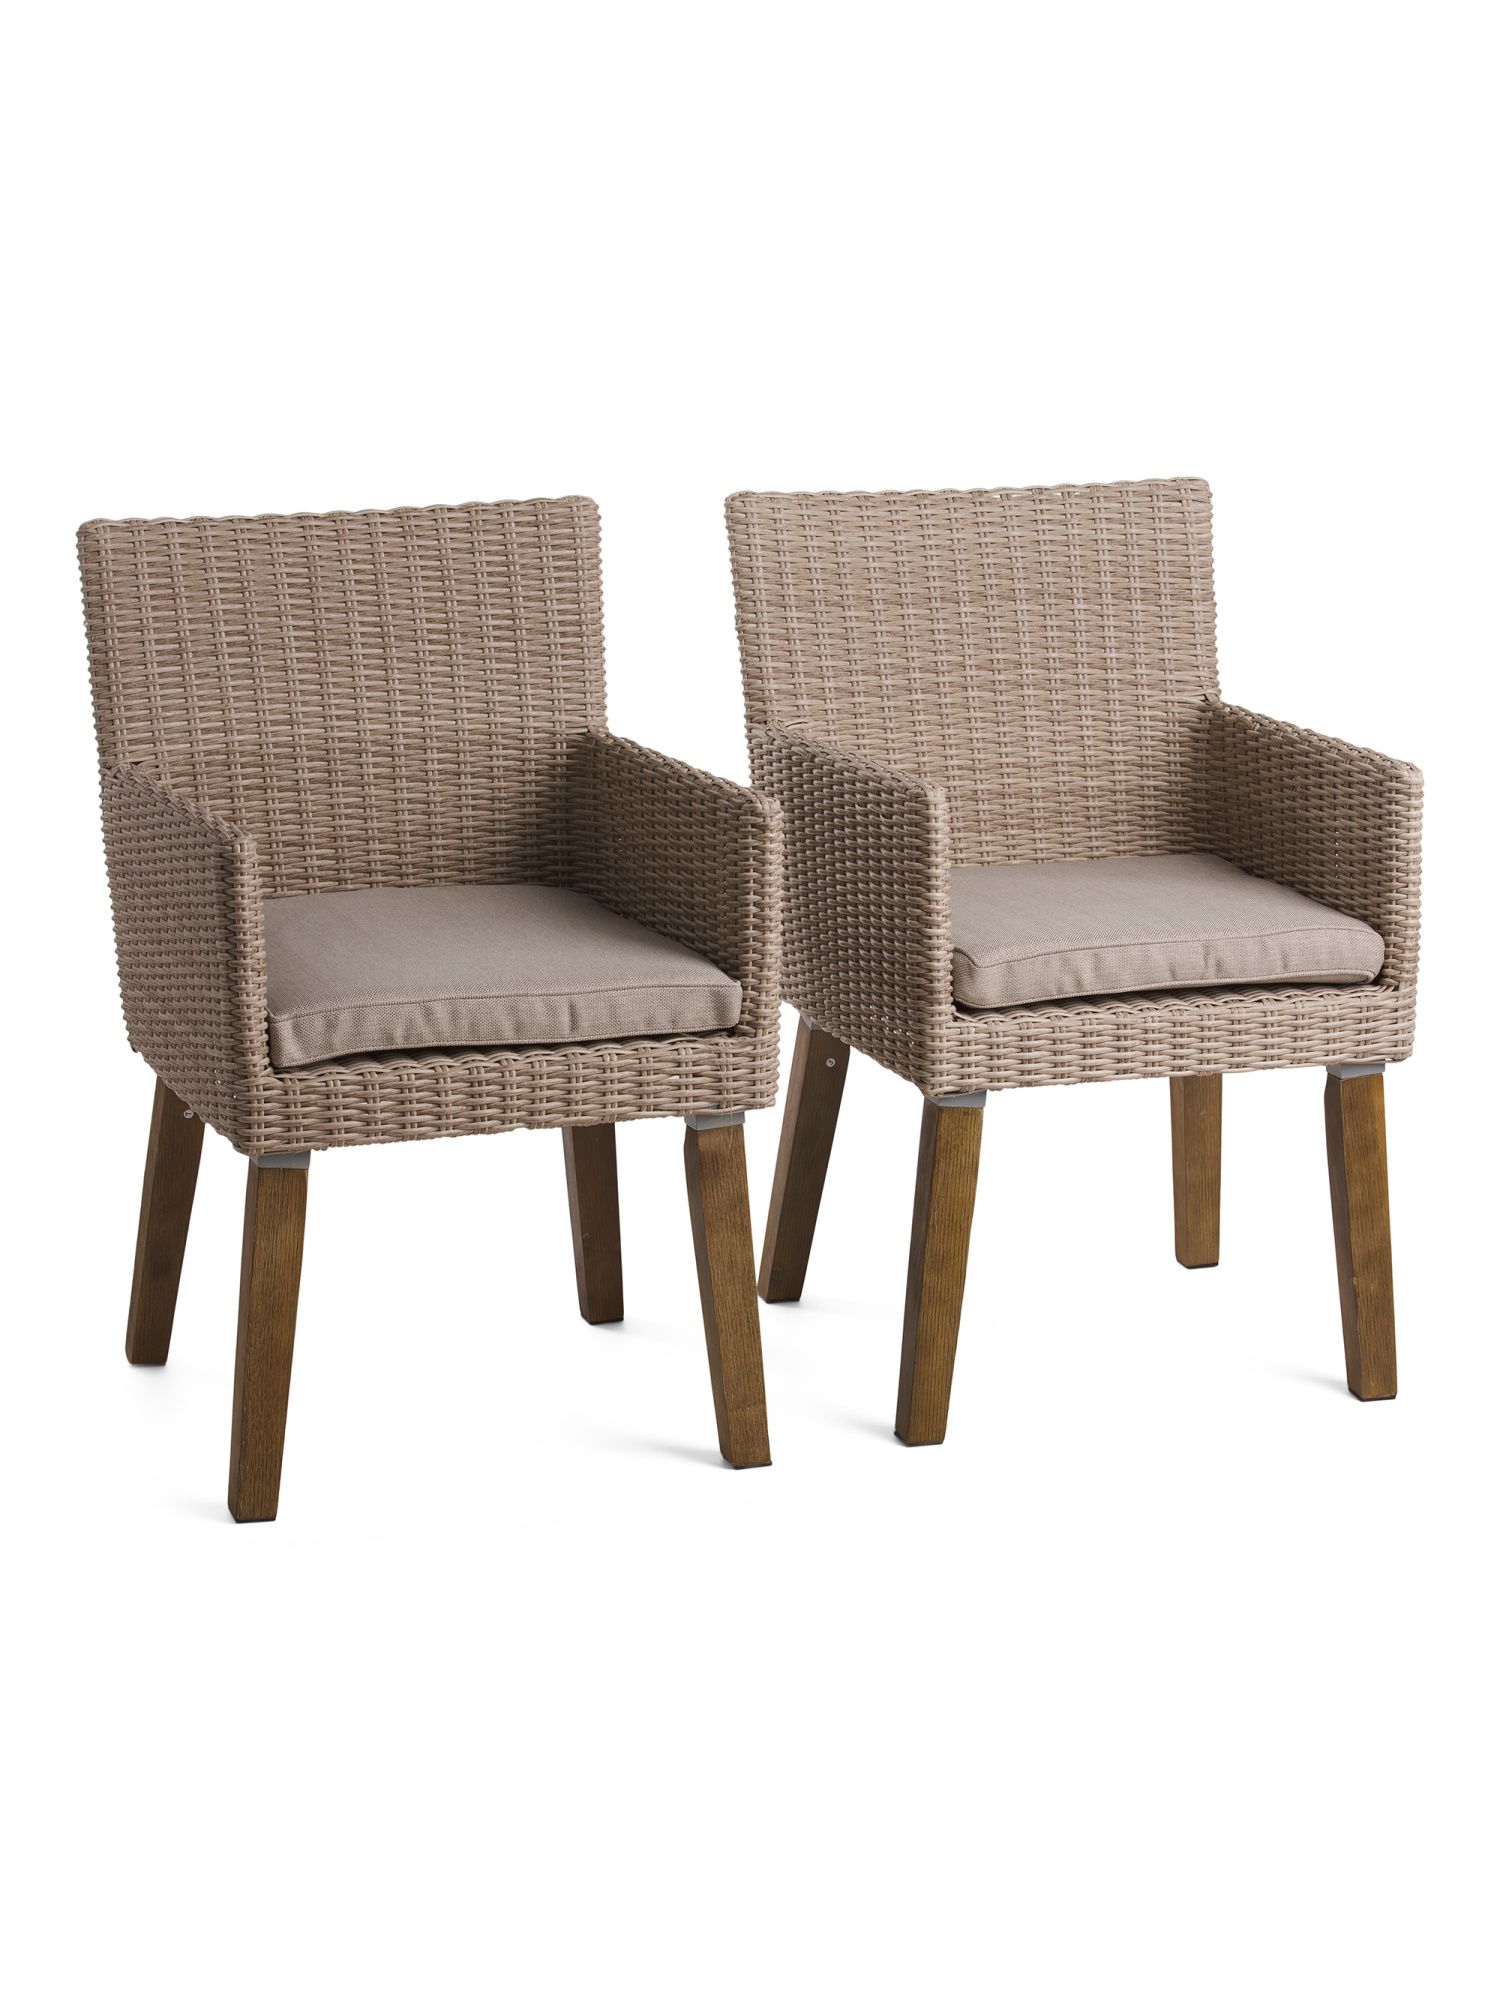 Set Of 2 Outdoor Wicker Chairs | TJ Maxx